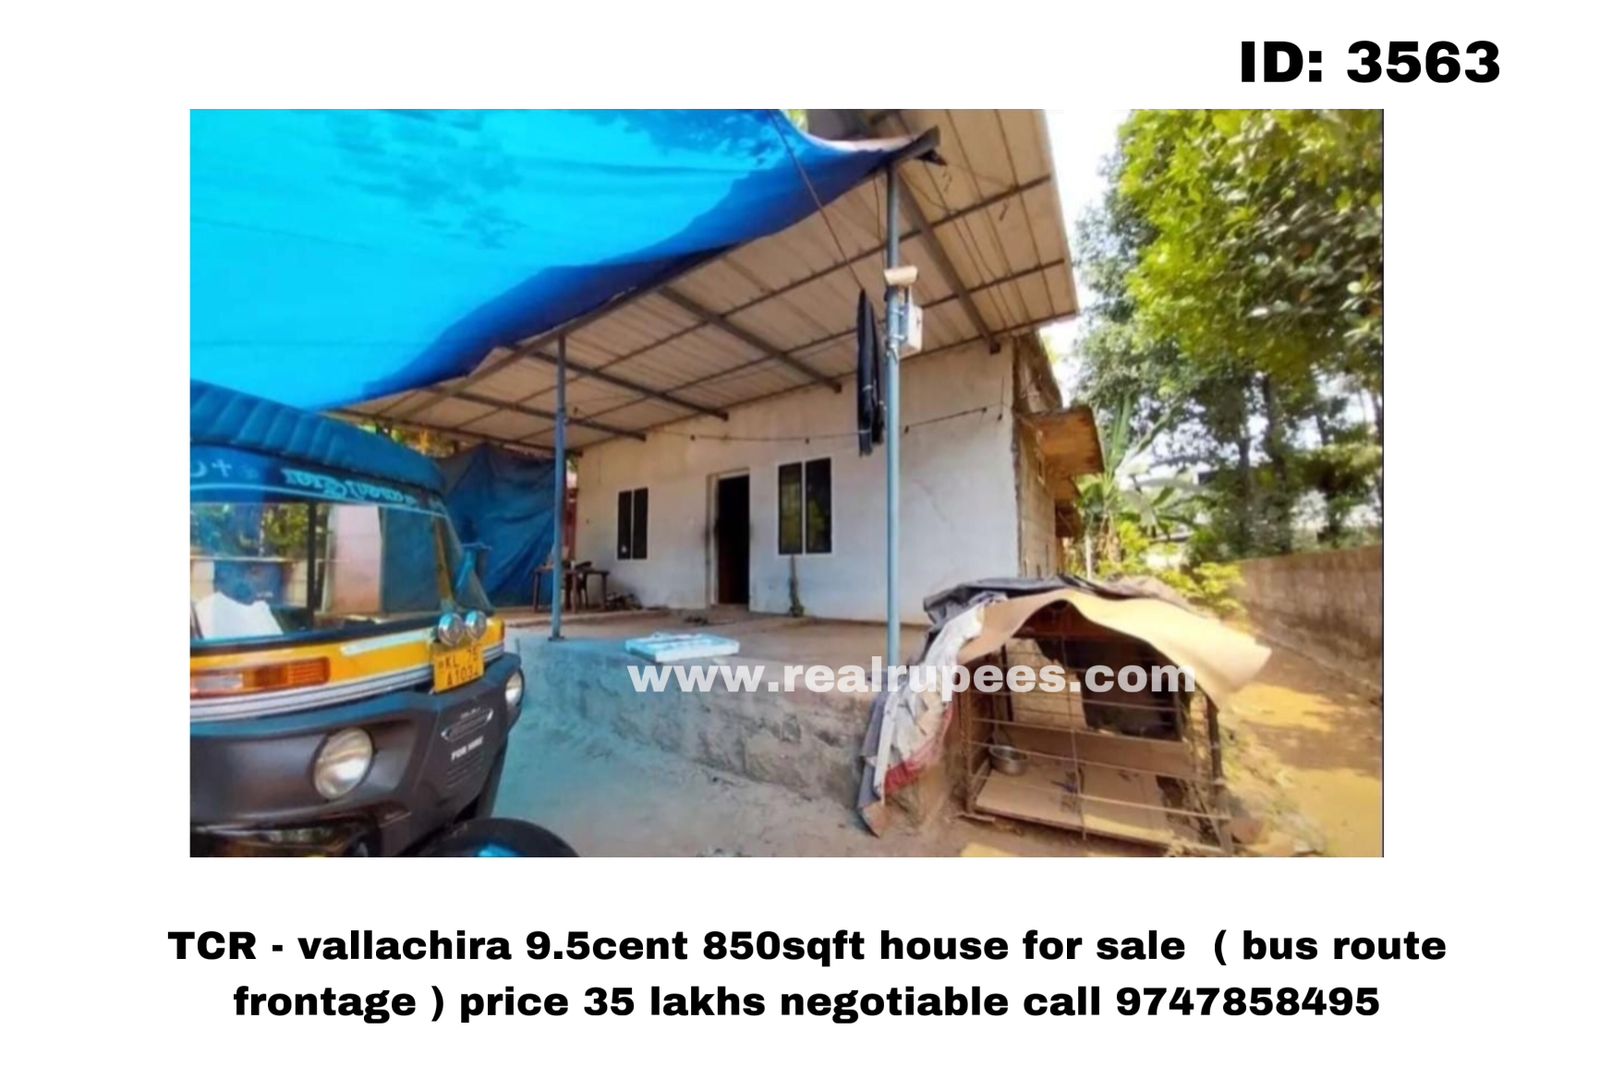 TCR - vallachira 9.5cent 850sqft house for sale  ( bus route frontage )